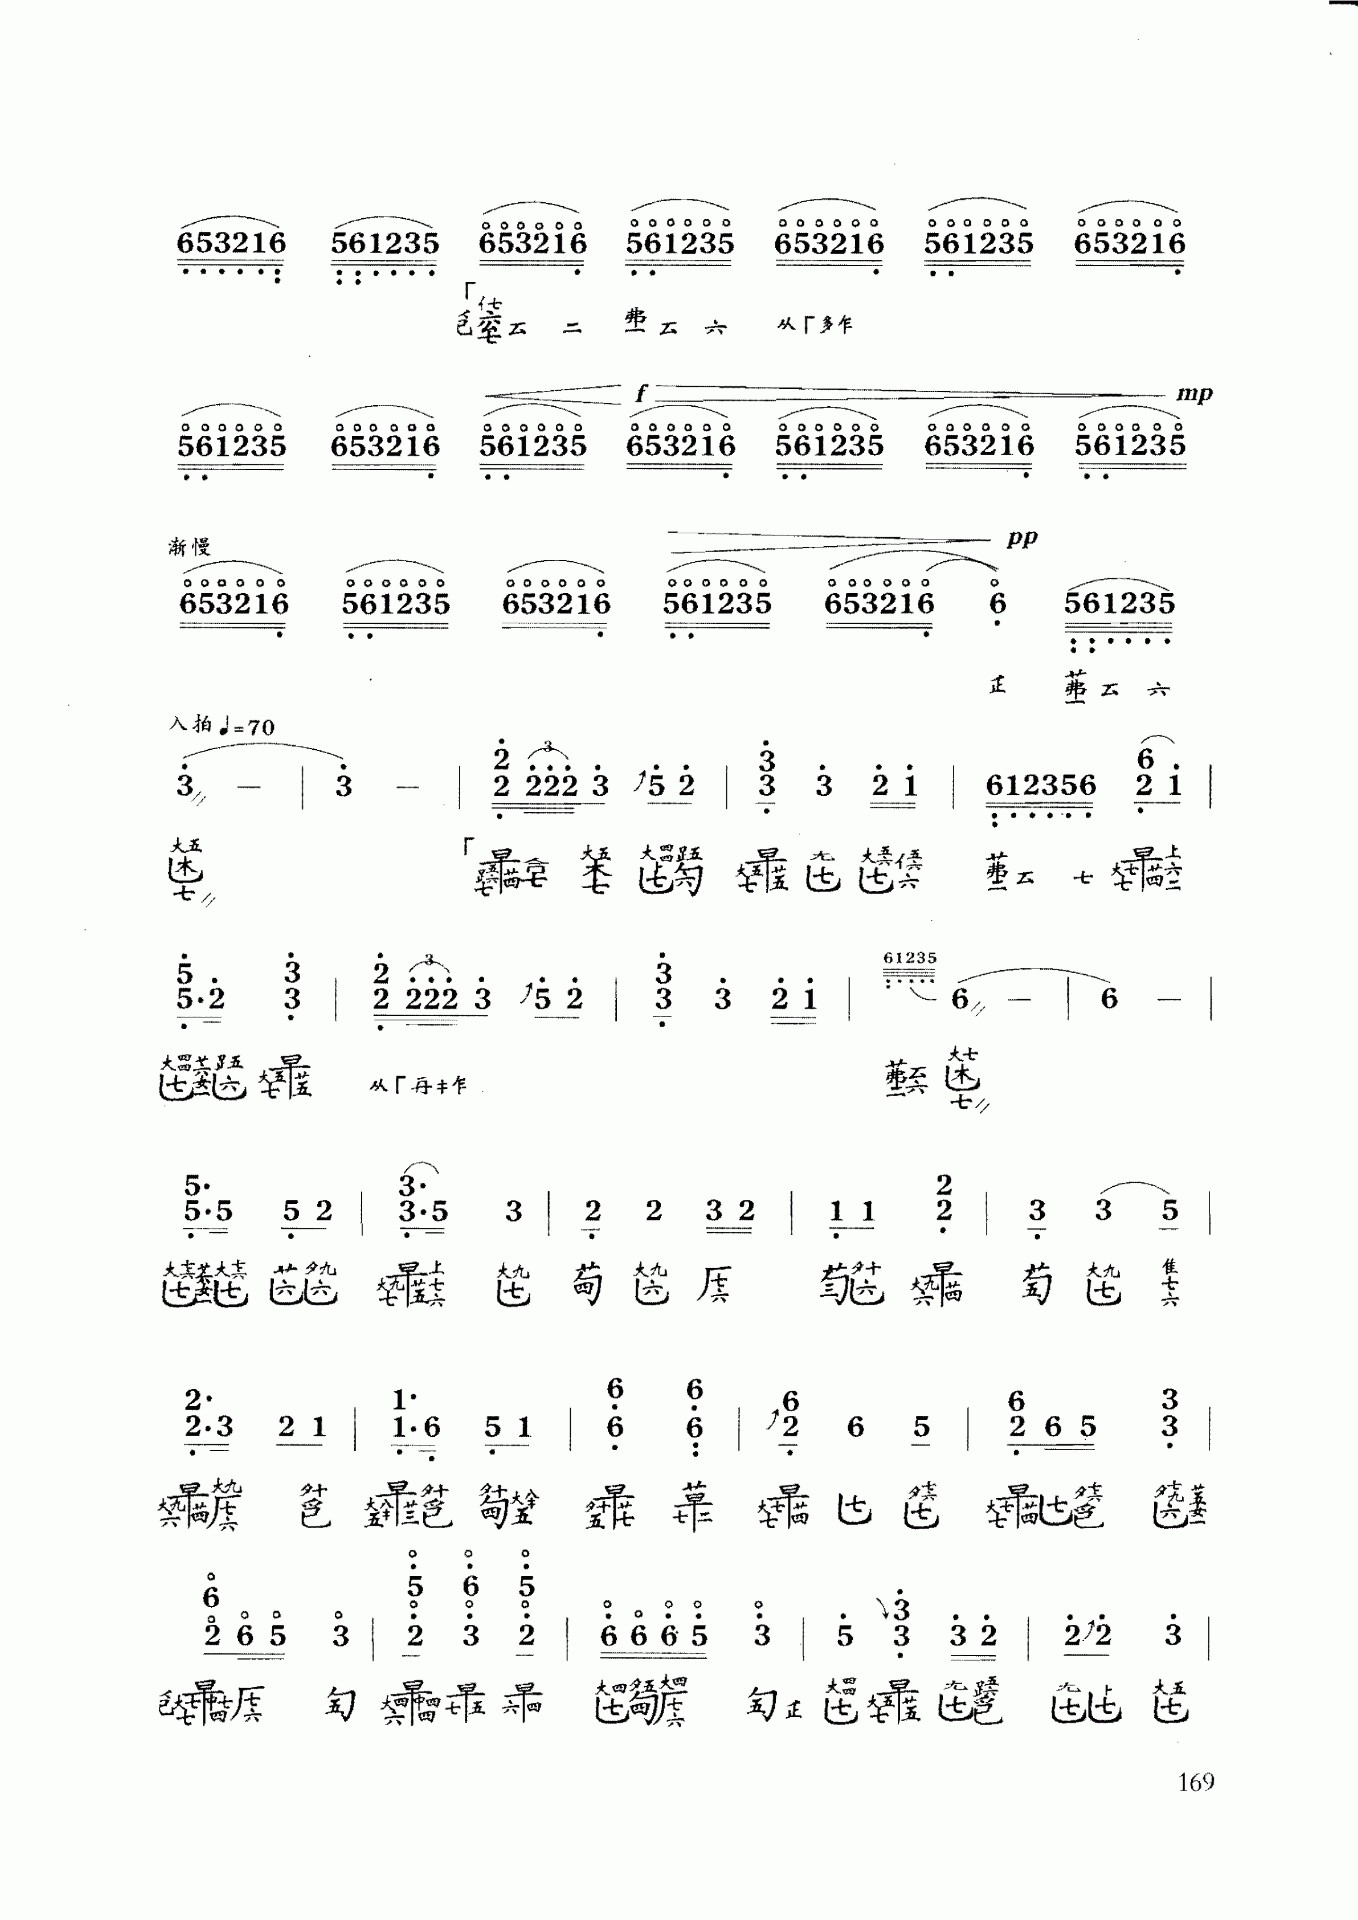 Three Gorges Boat Song（guqin sheet music）